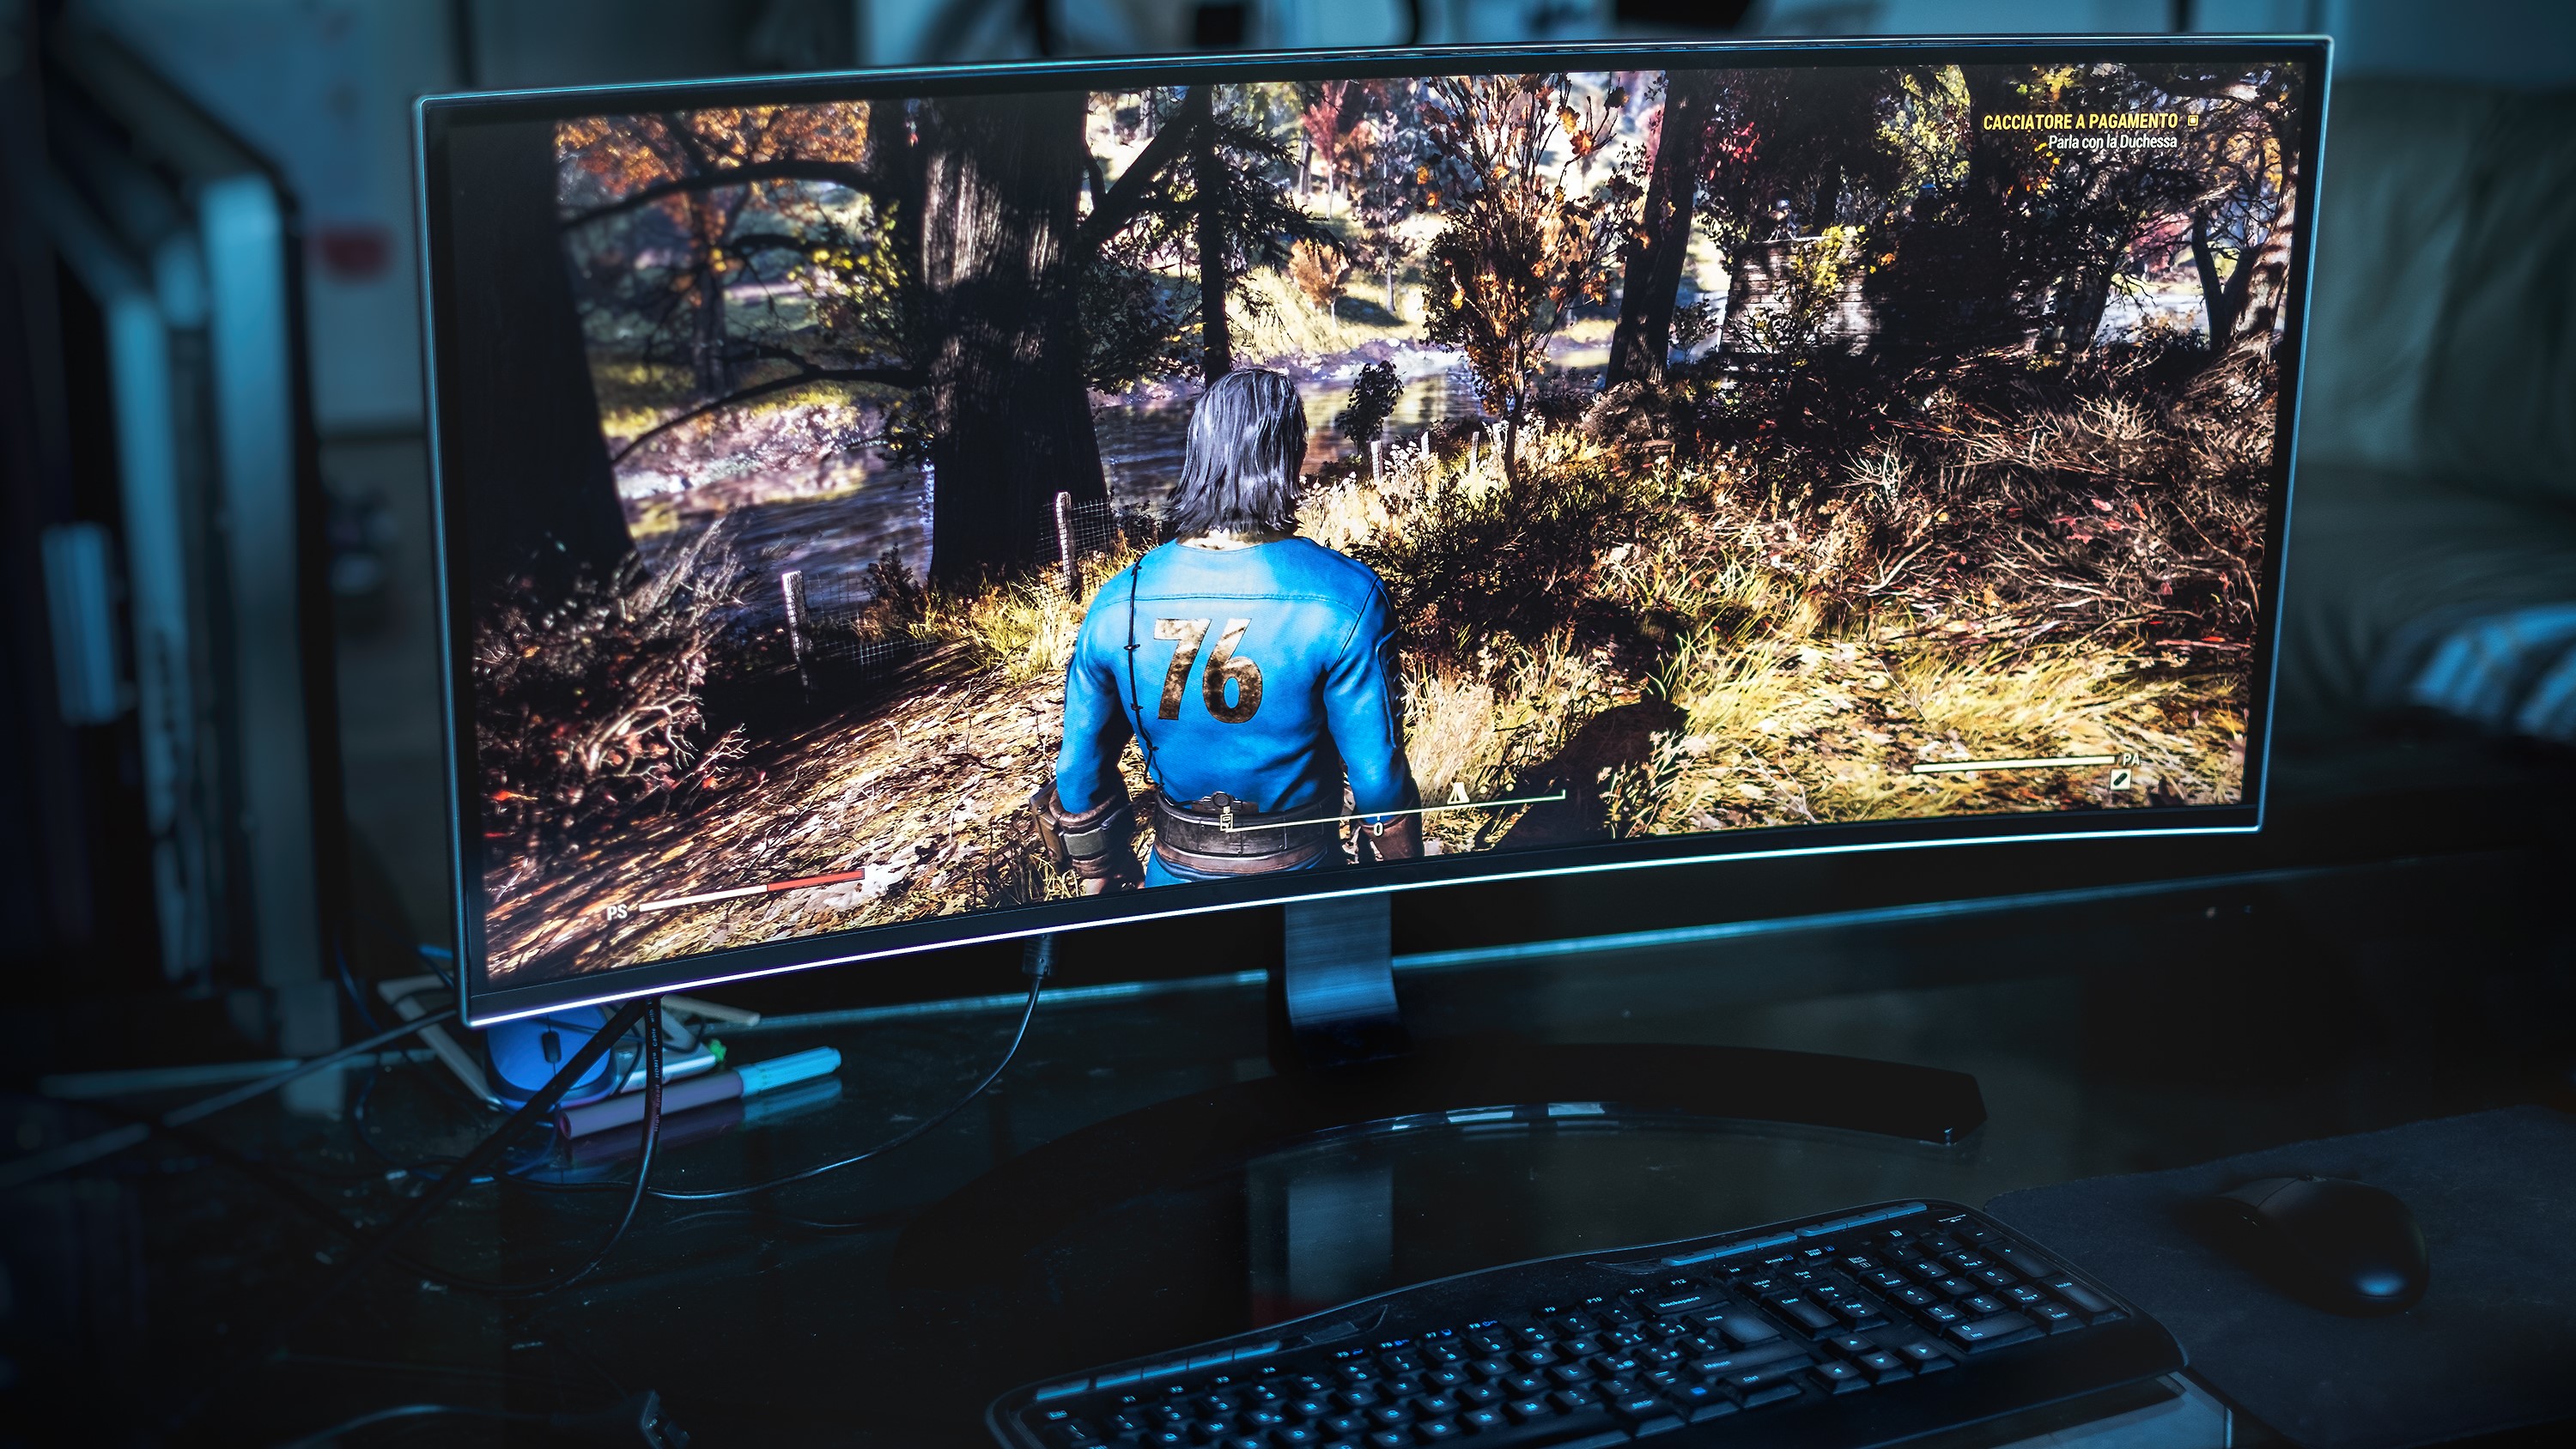 34 inch ultrawide monitor • Compare best prices now »